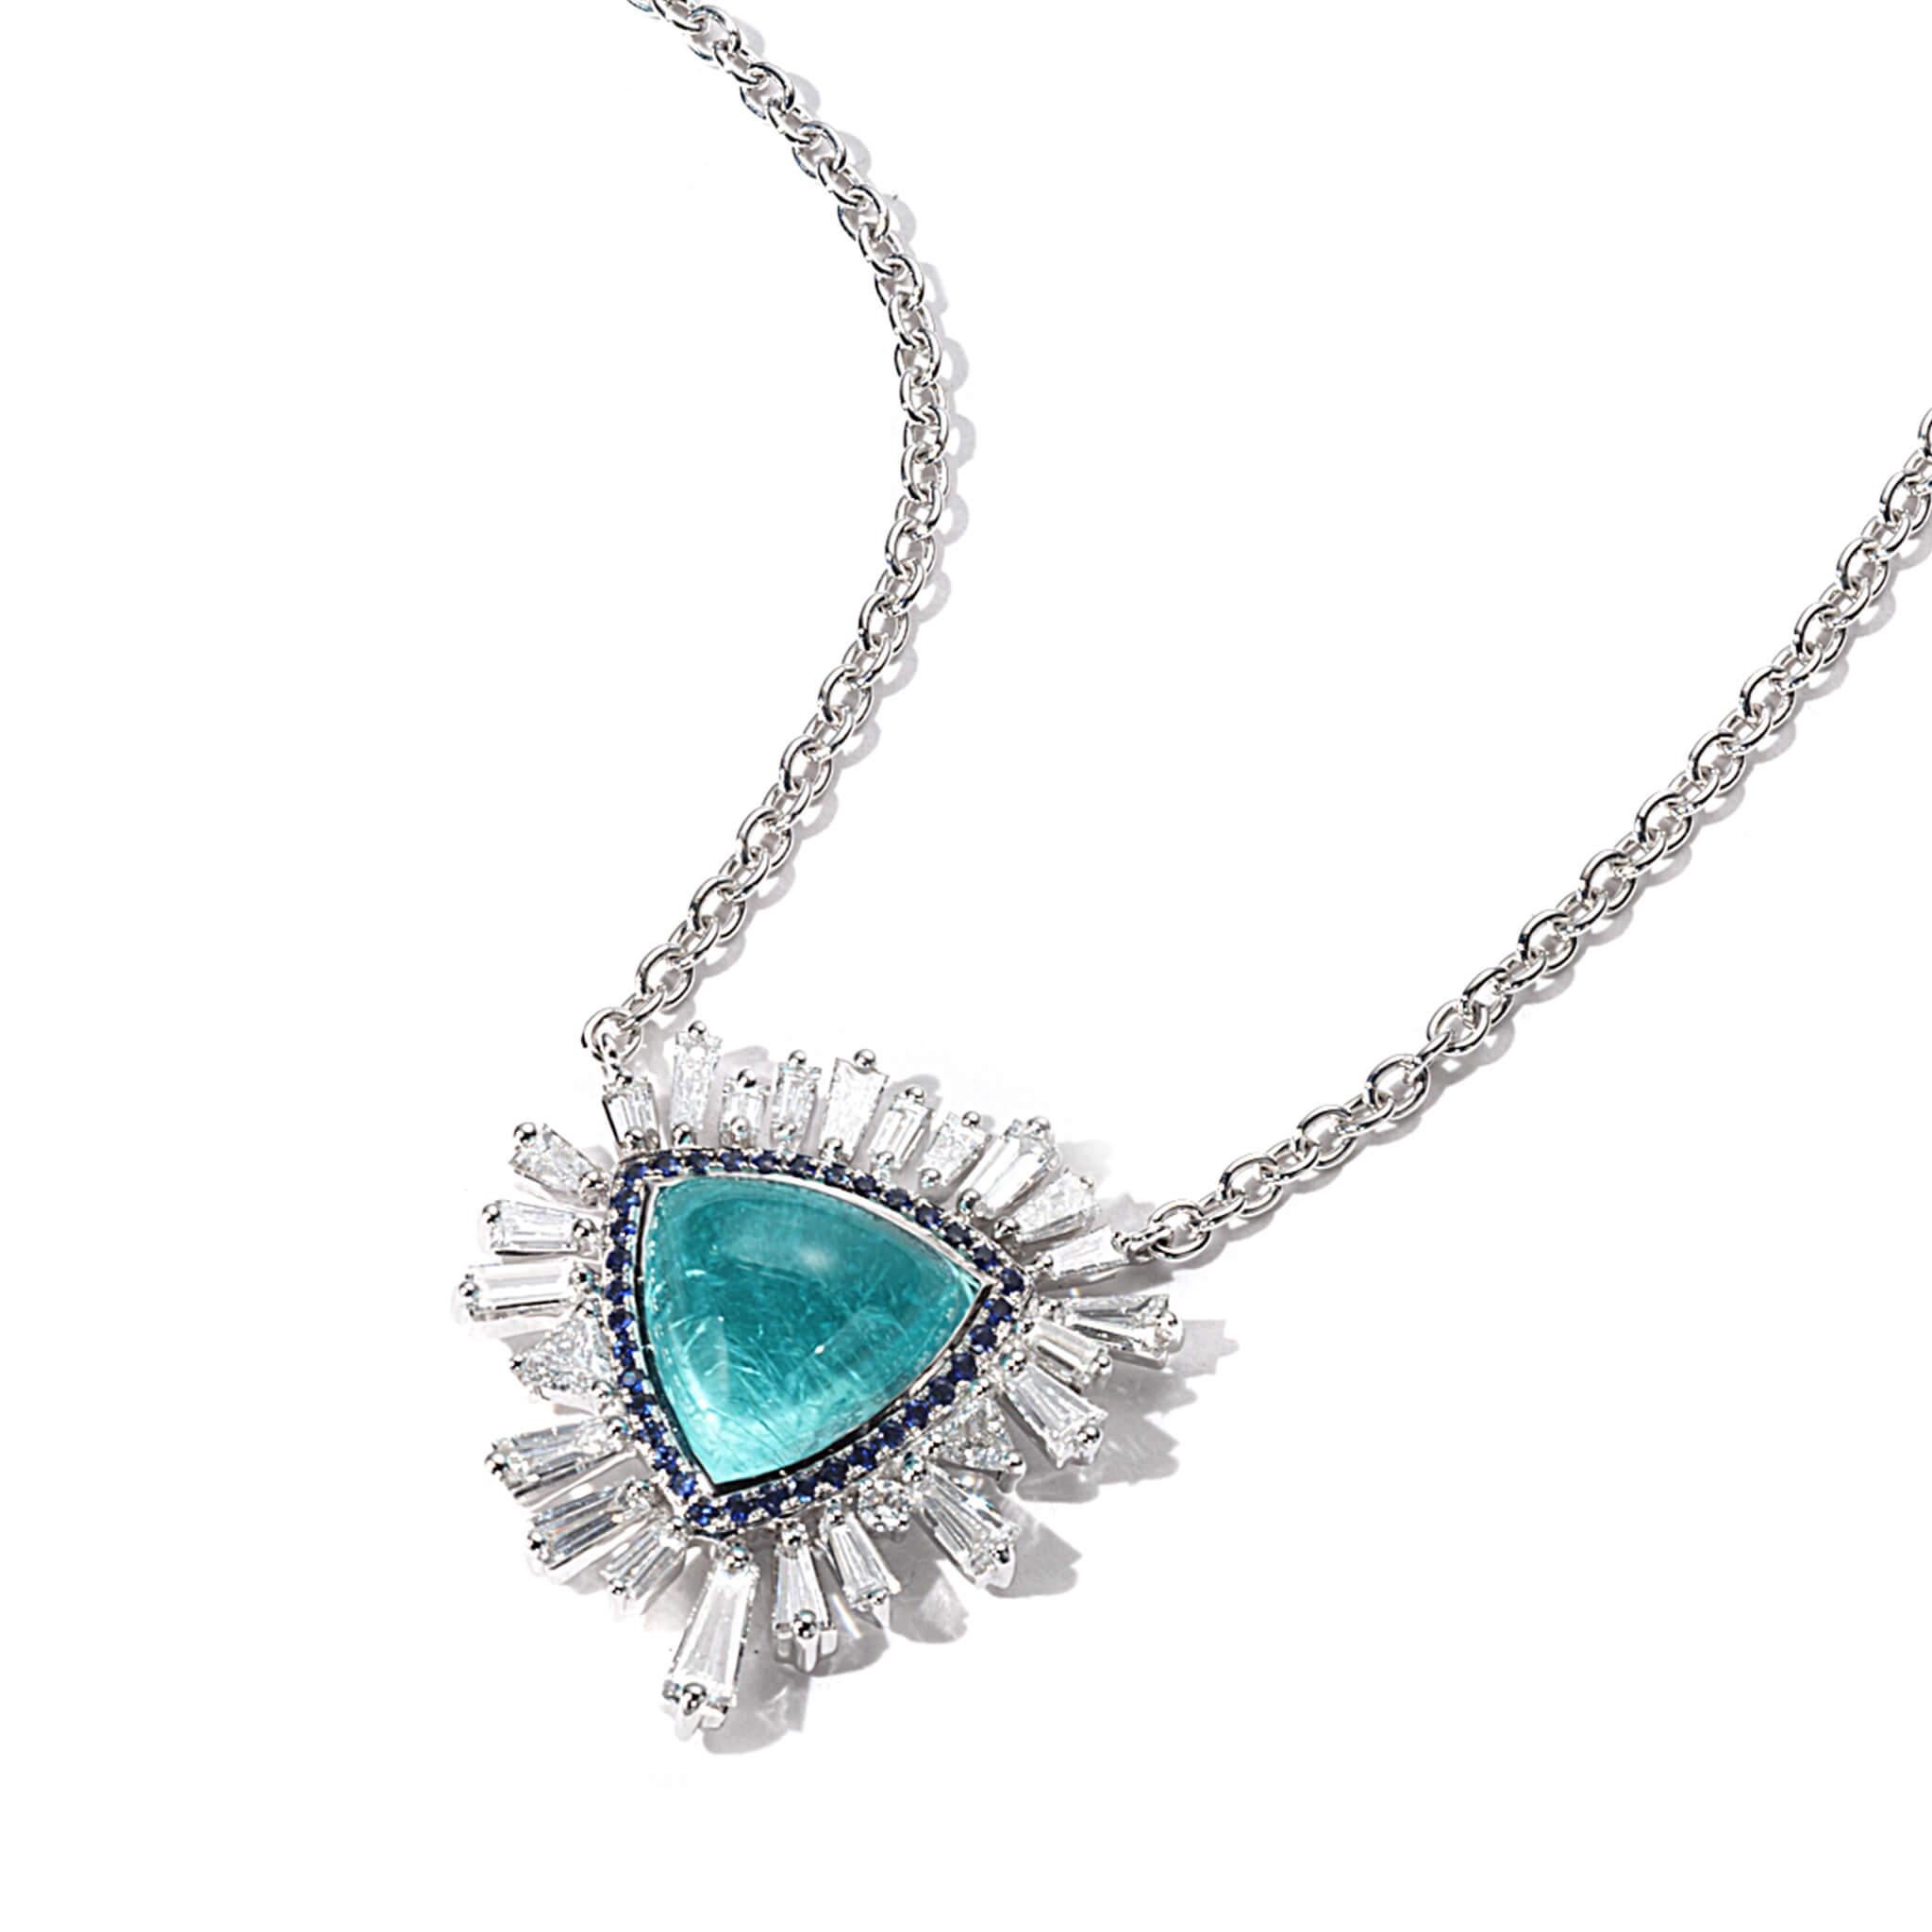 Trinity necklace set in 18K white gold with 5.45cts paraiba tourmaline, 1.73cts diamond, and 0.17cts sapphire.
